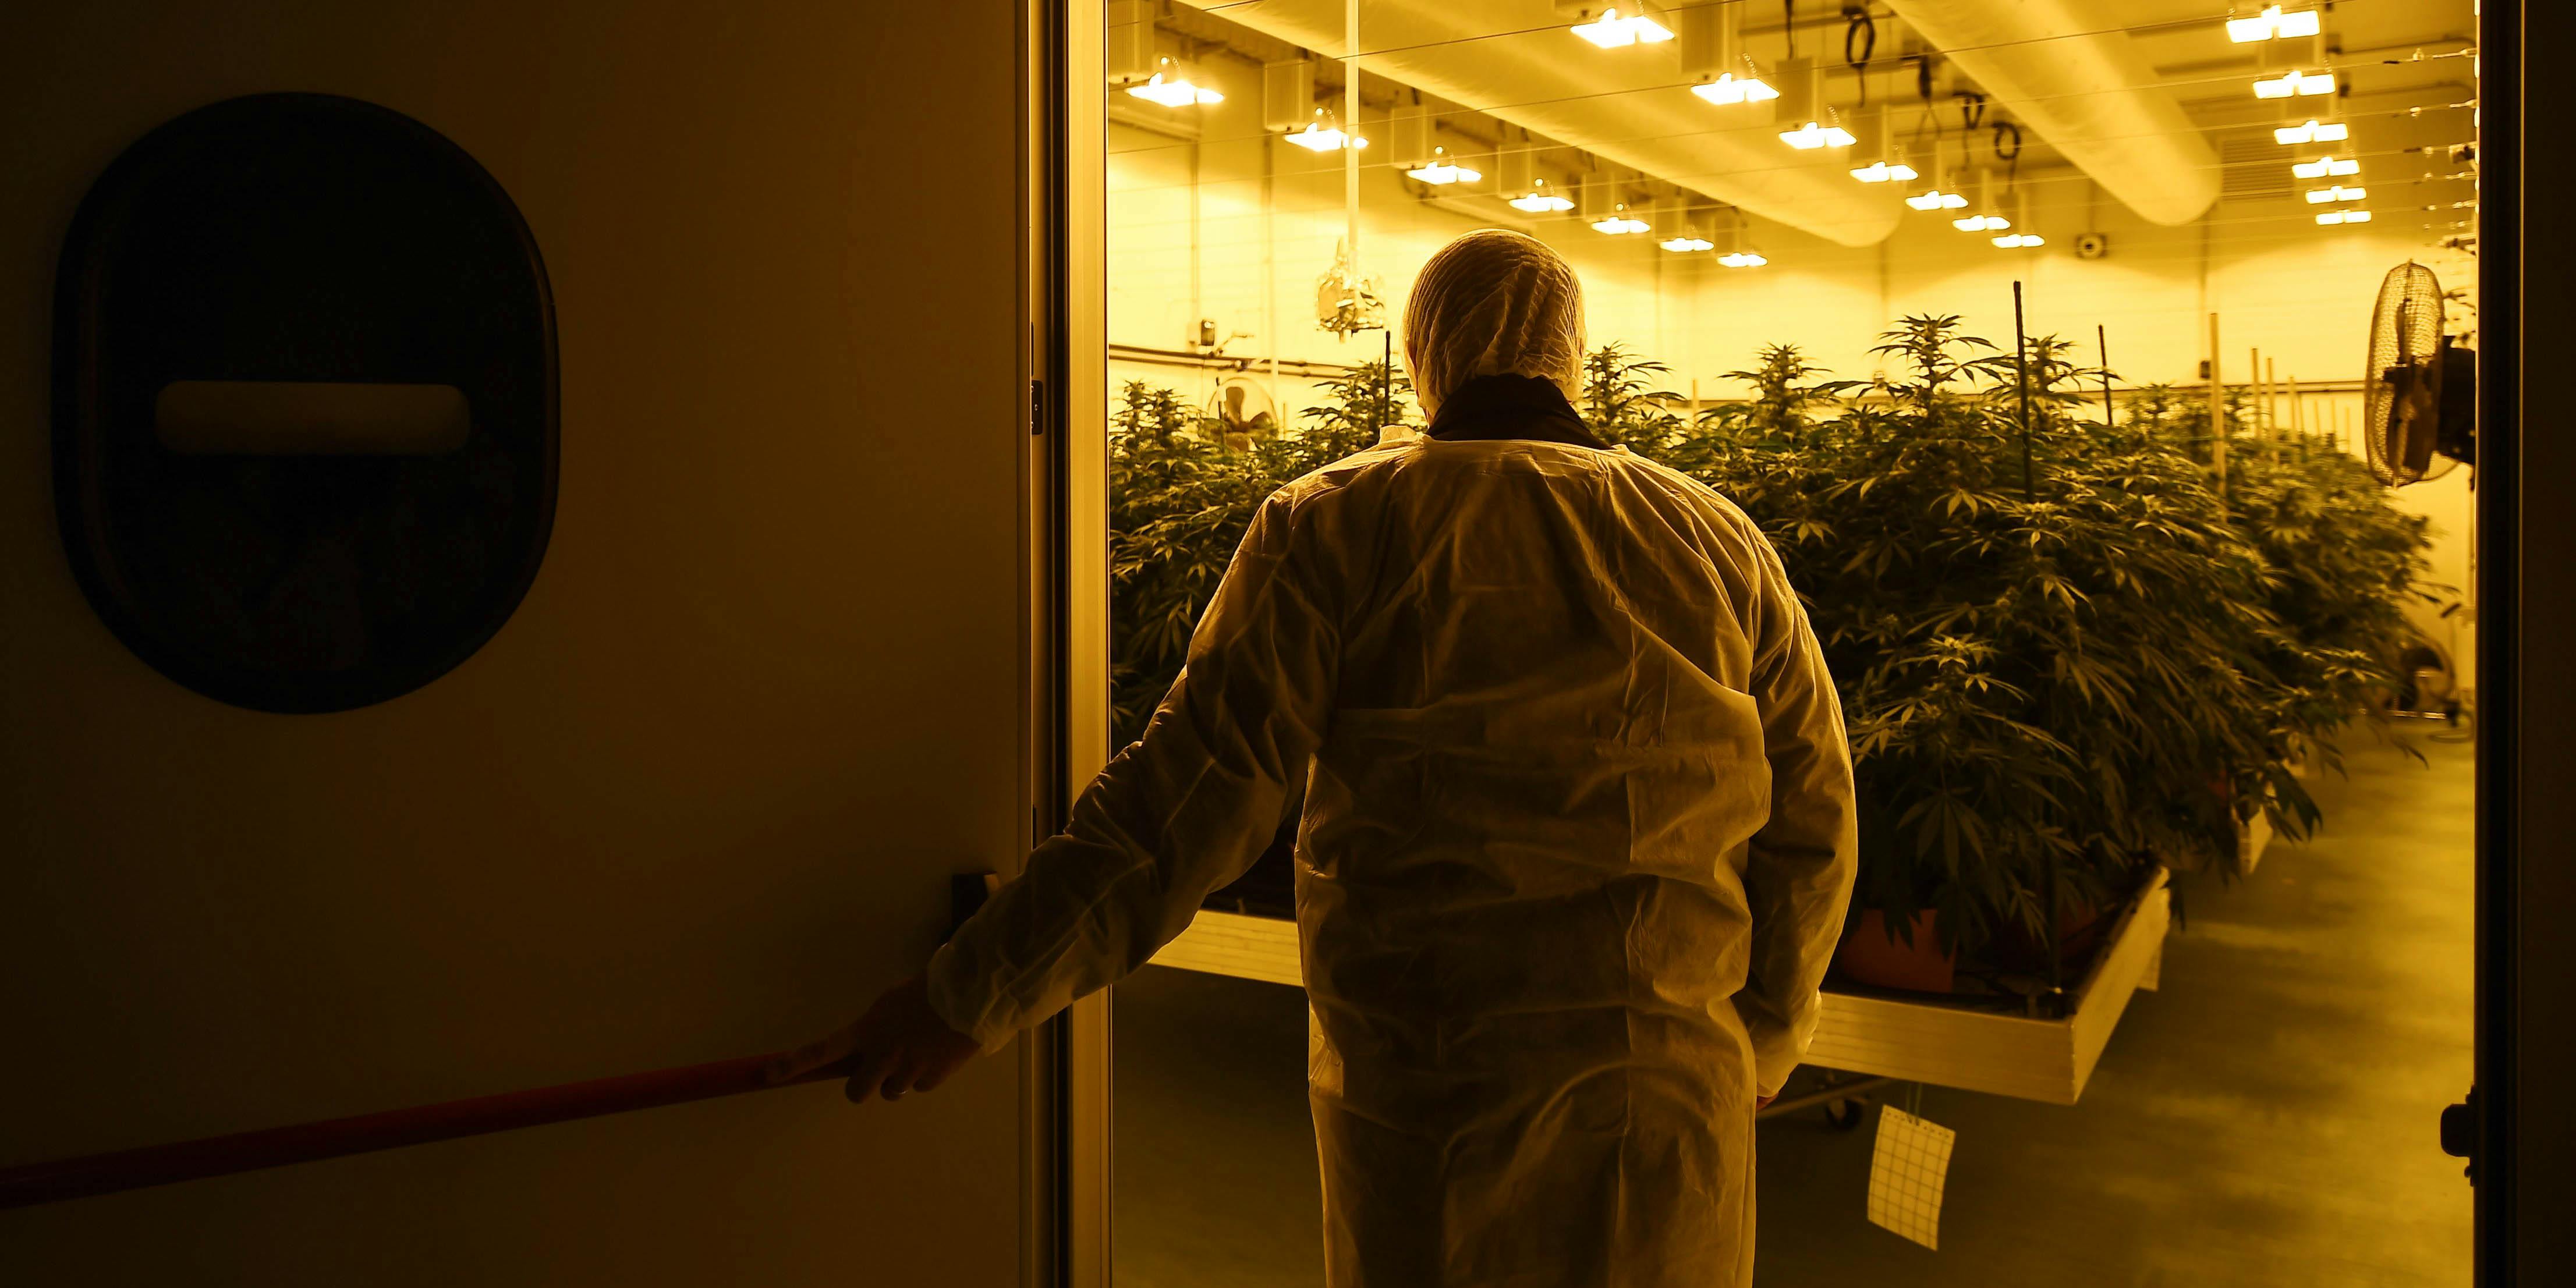 Modern Day Weed vs. Hippie Weed: Is Weed Getting Stronger? Here, a man is shown entering a grow room